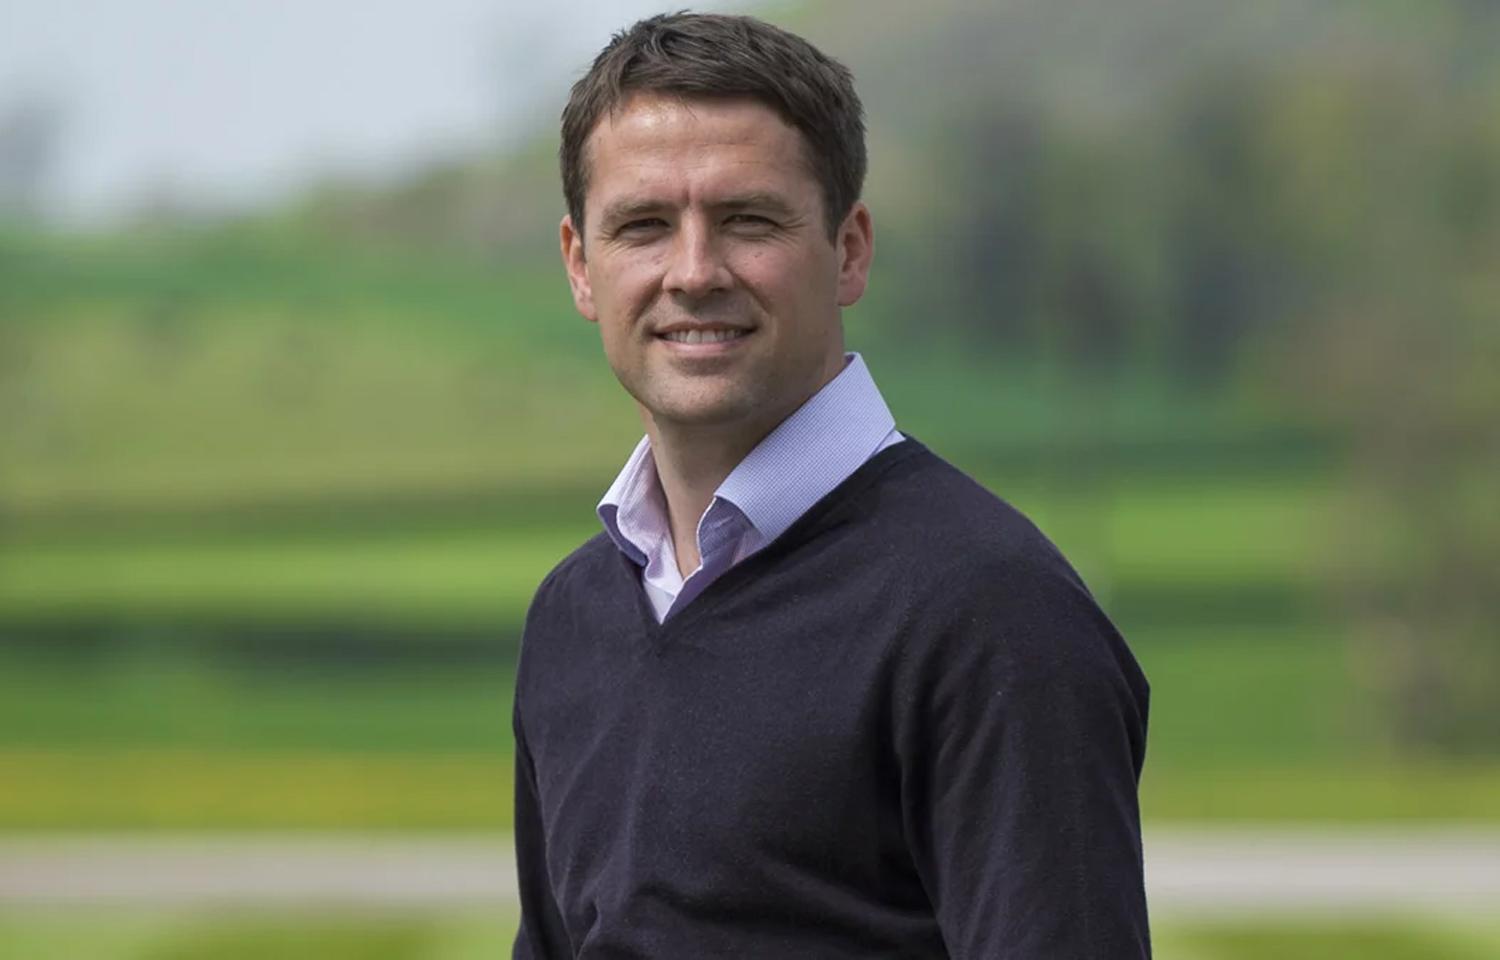 Michael Owen says father was driving force and... - Vanguard News